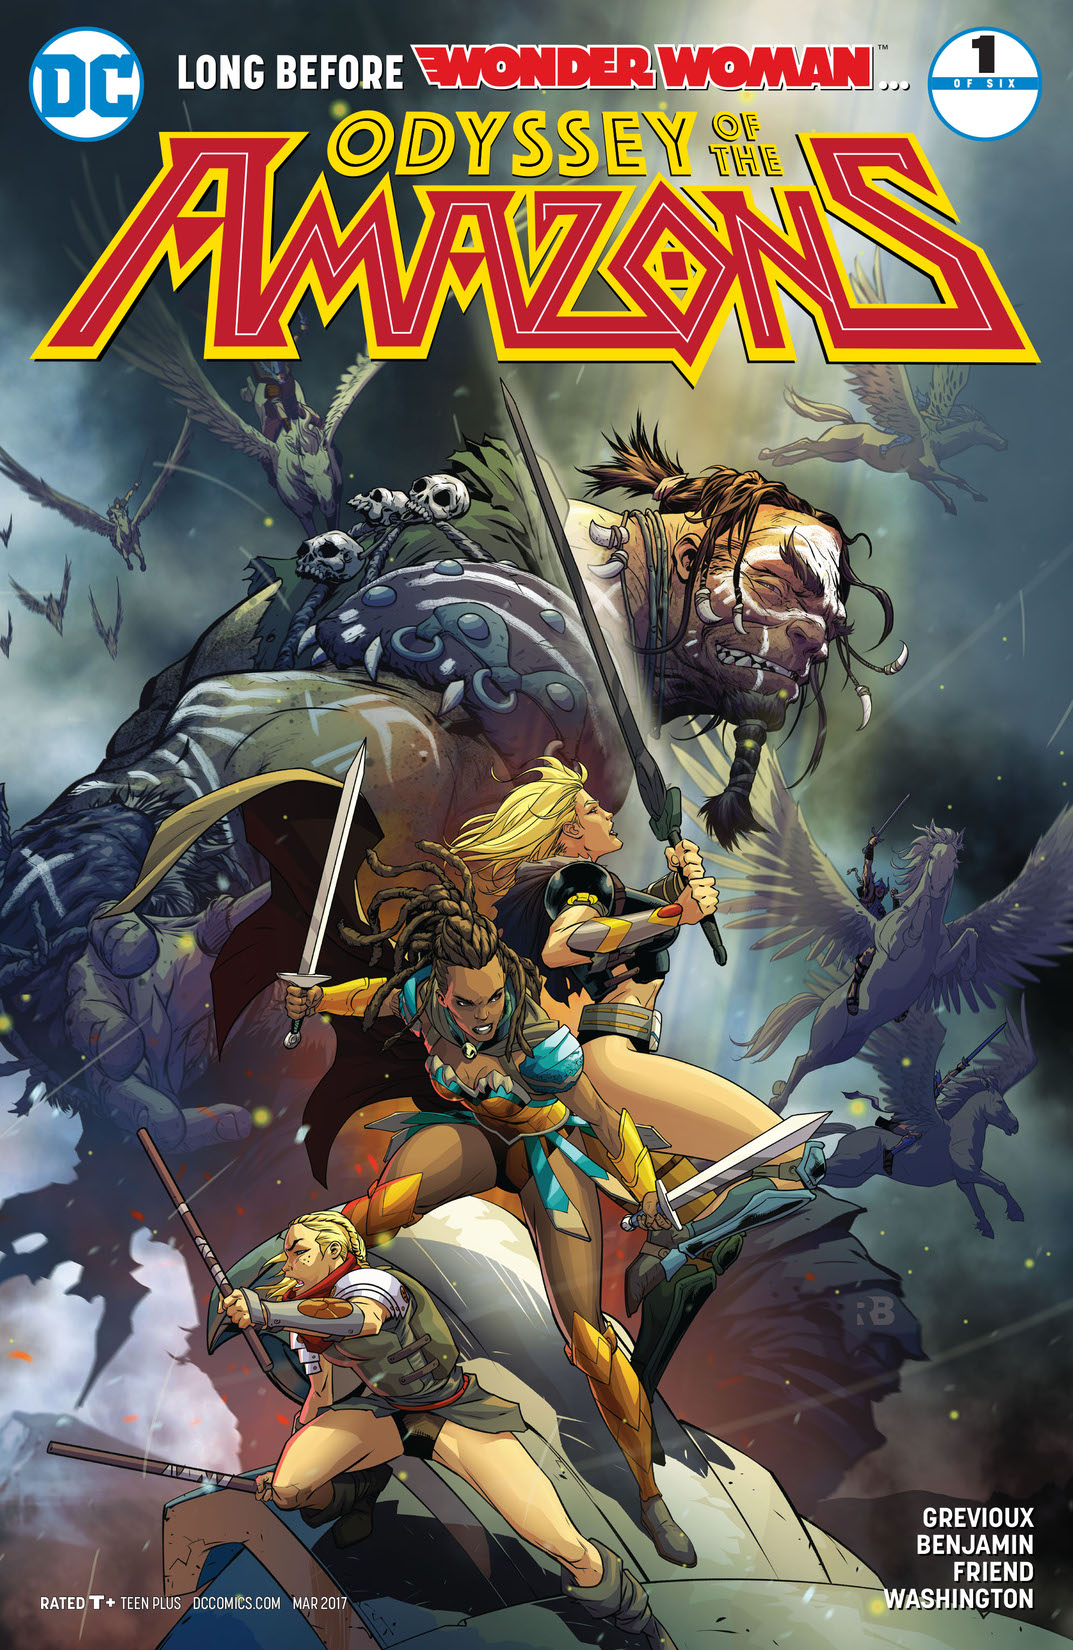 The Odyssey of the Amazons #1 preview images